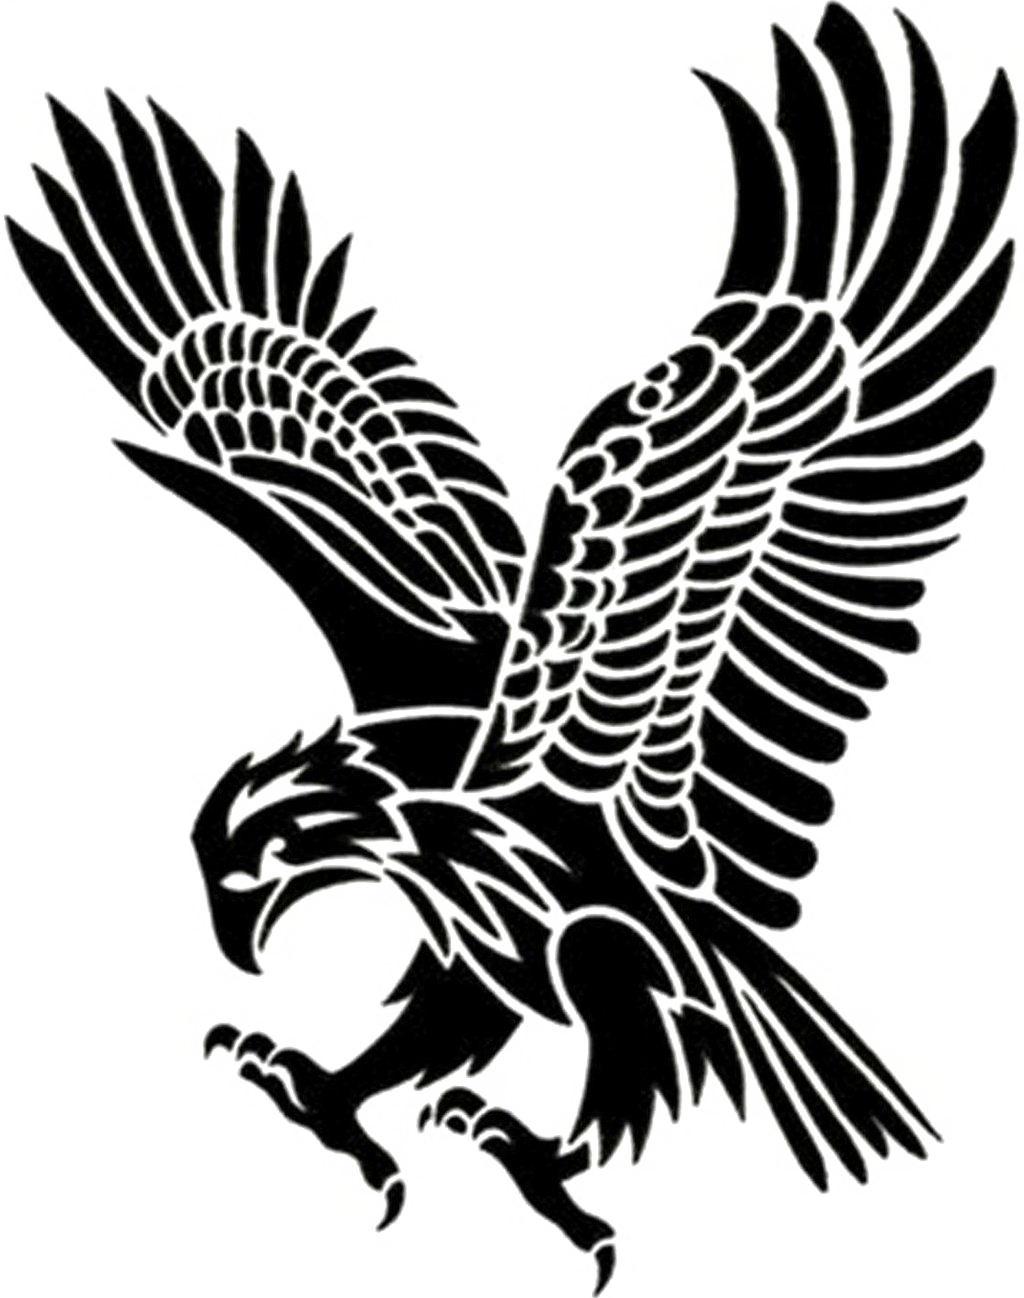 Download Feather Infinity Tattoo Design RoyaltyFree Vector Graphic   Pixabay